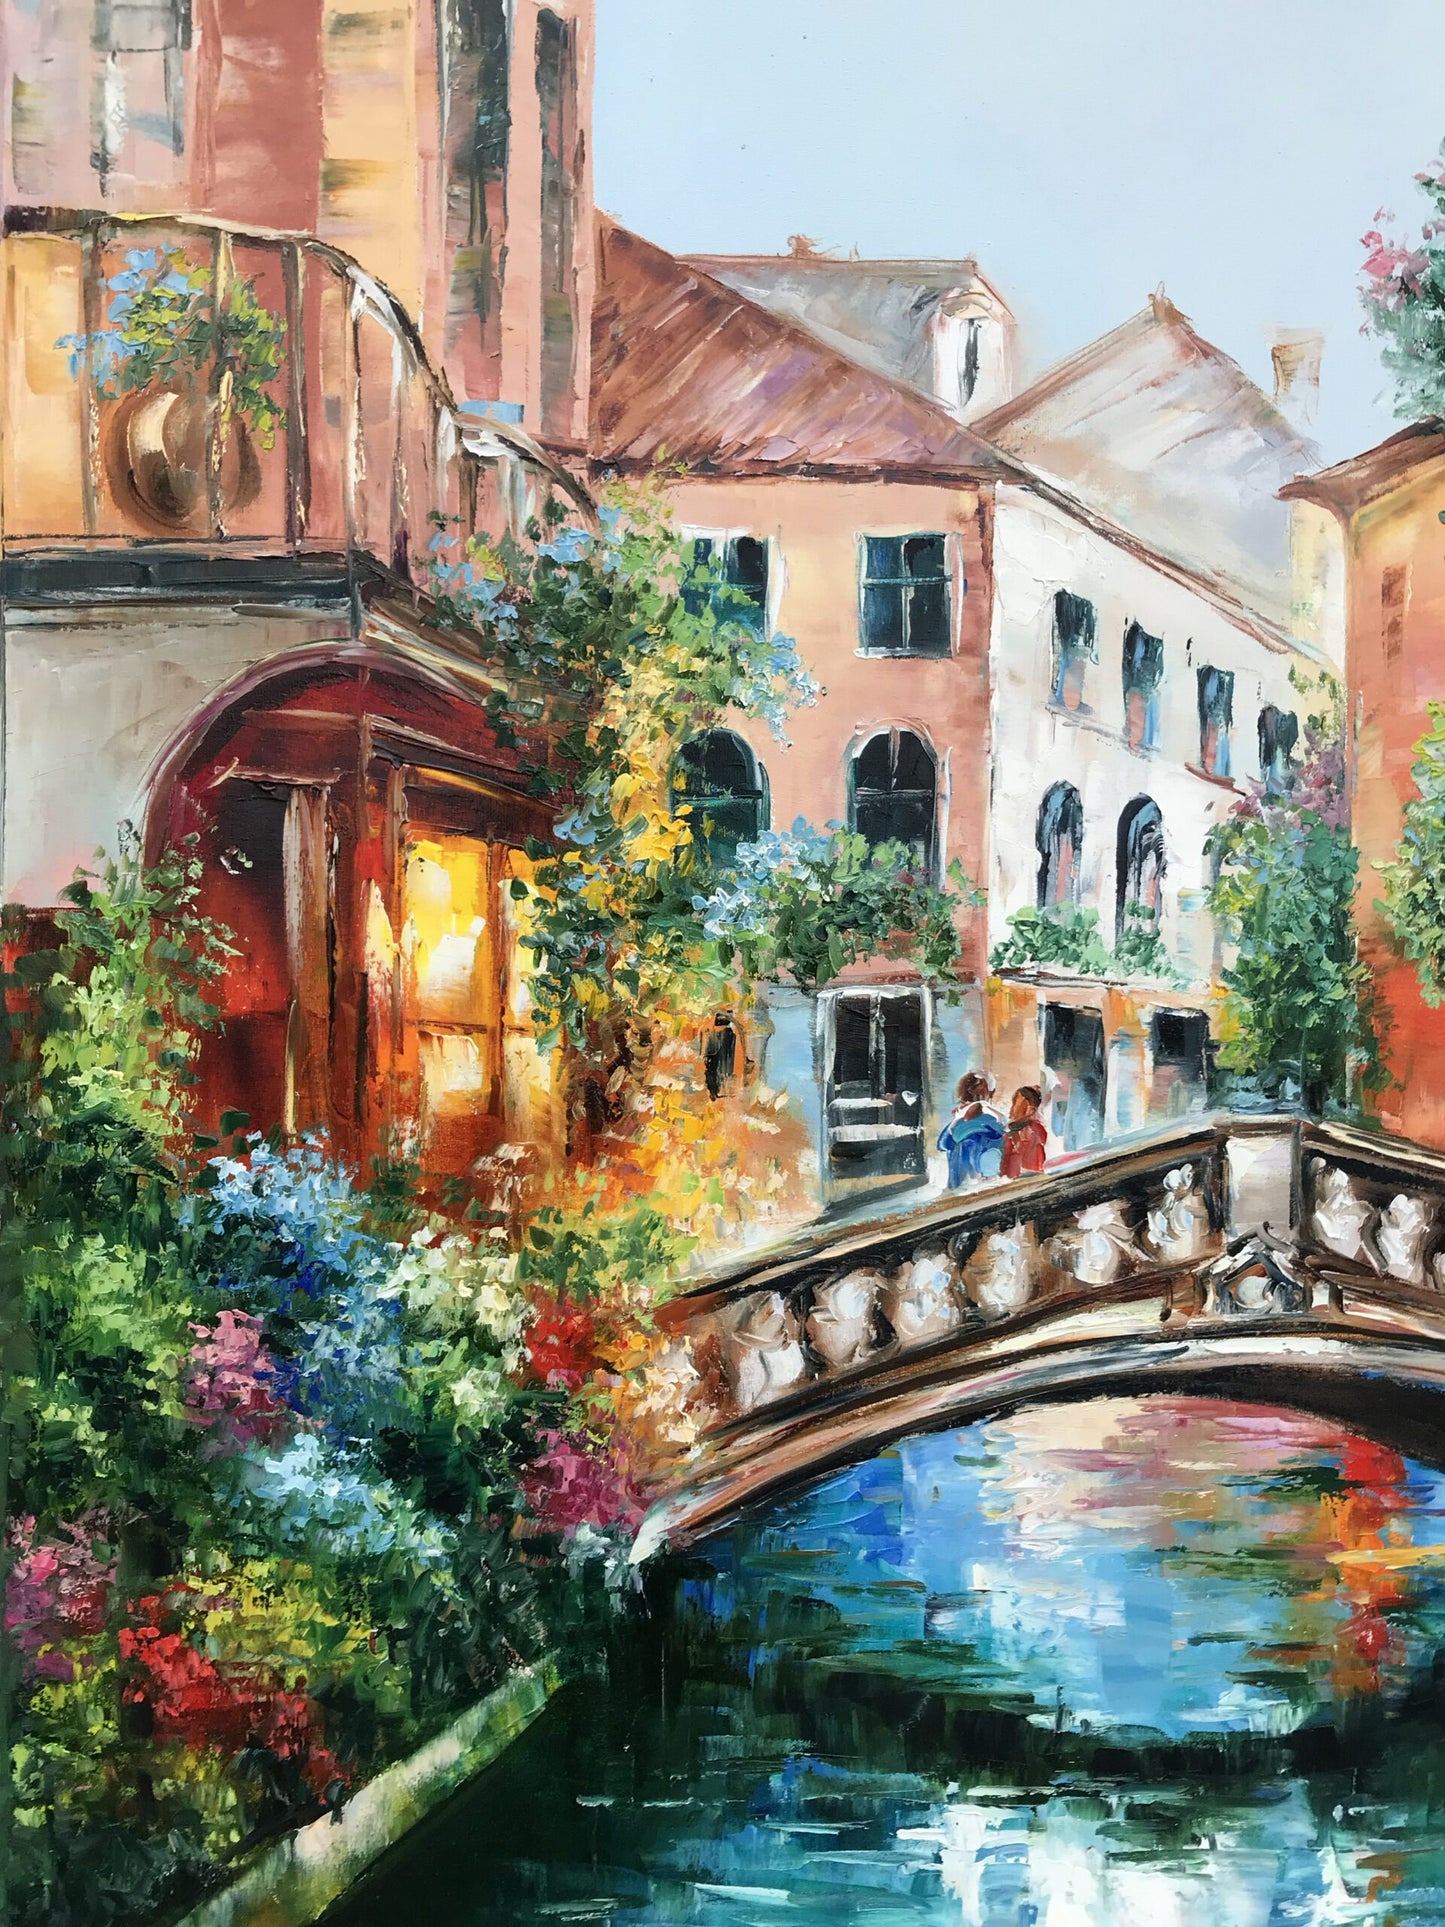 Venice Canal Oil Painting Original Signed Italy Painting Venetian Wall Art 36x36 Venice Italy Artwork Venice Painting on Canvas